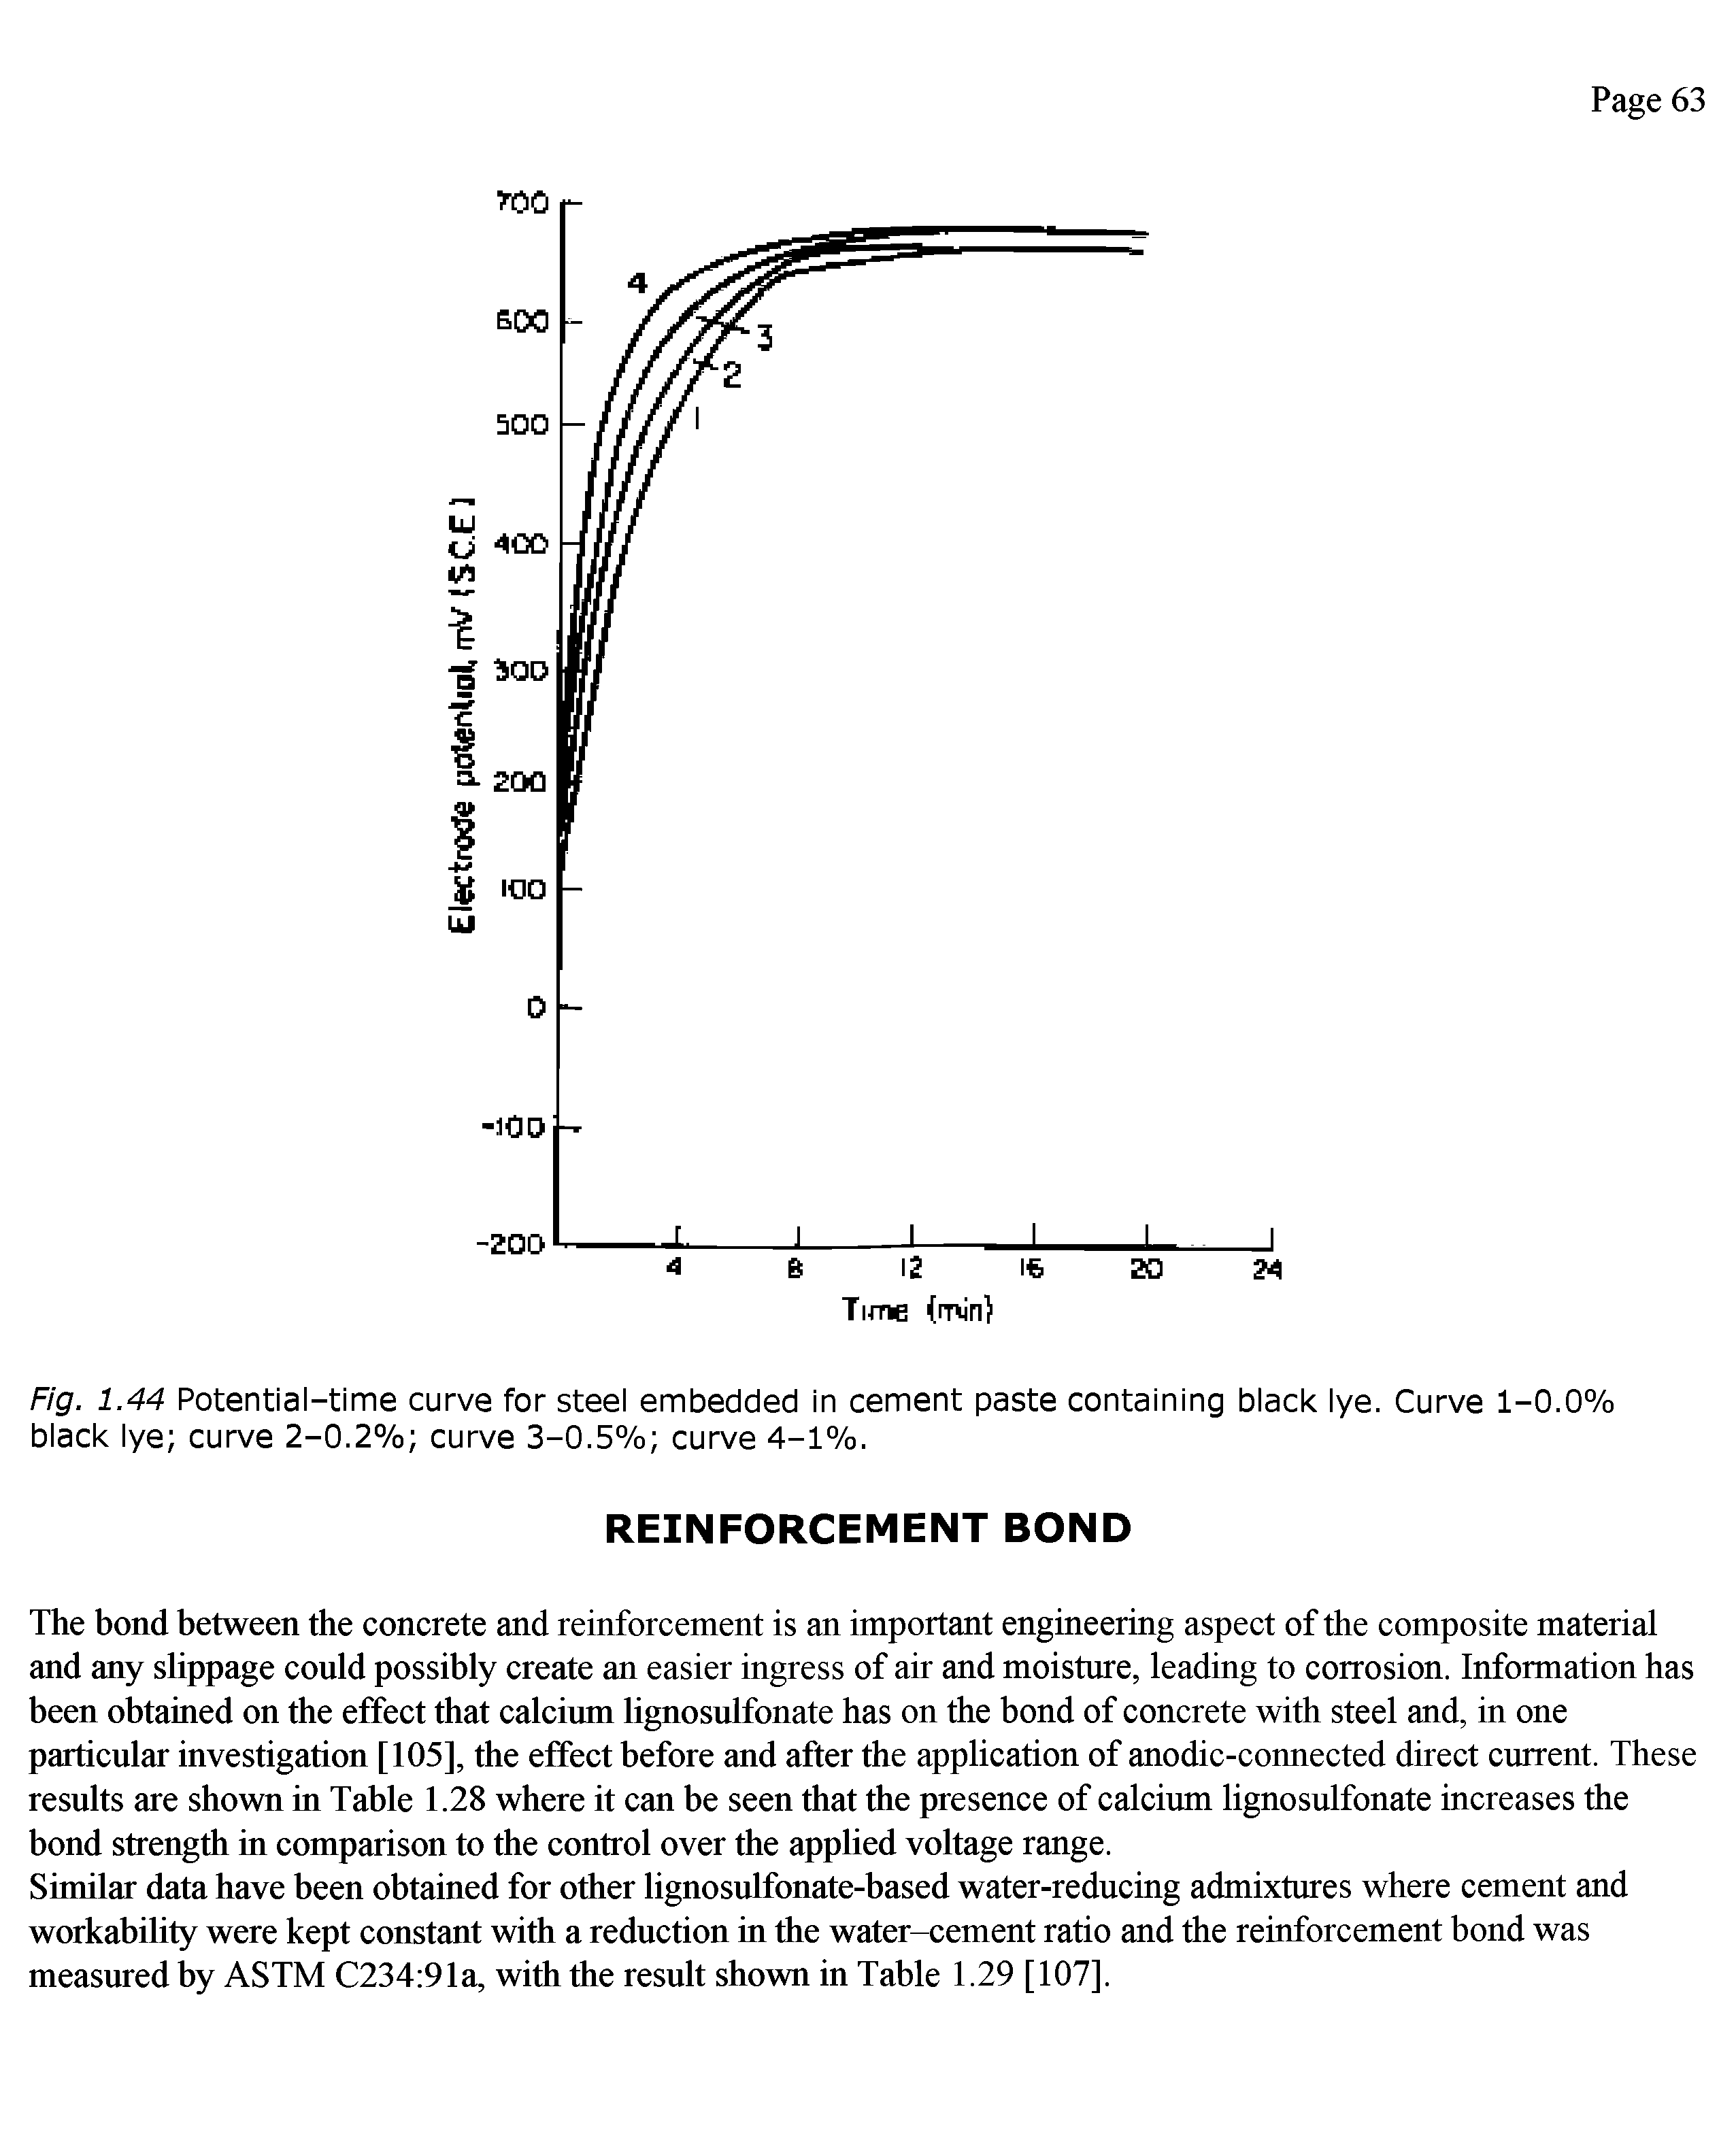 Fig. 1.44 Potential-time curve for steel embedded in cement paste containing black lye. Curve 1-0.0% black lye curve 2-0.2% curve 3-0.5% curve 4-1%.